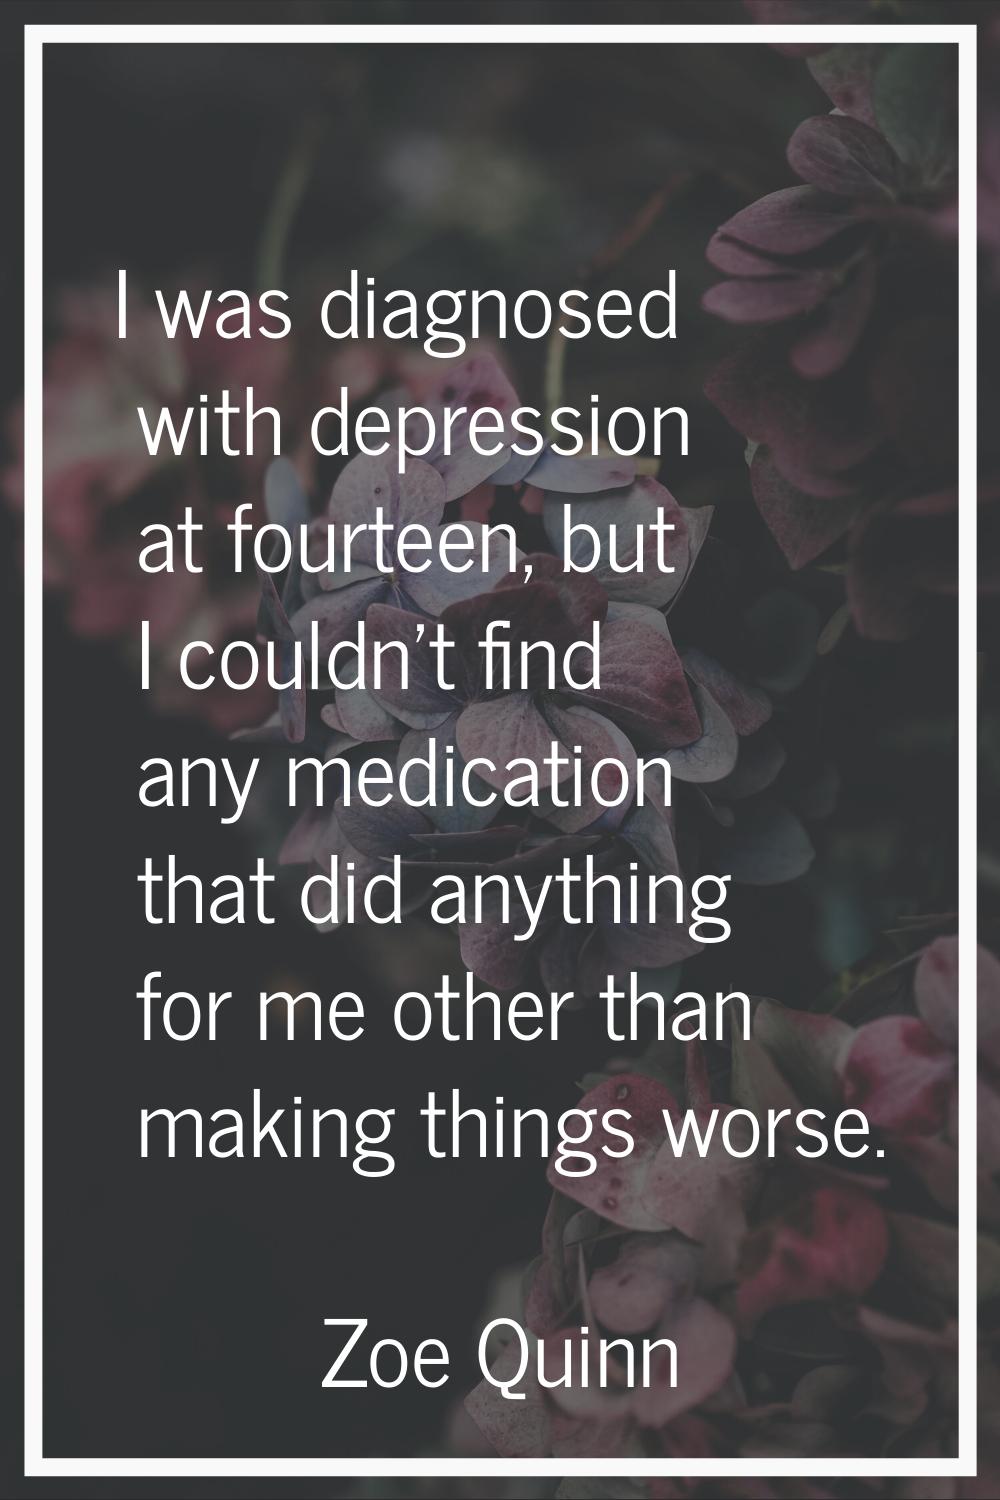 I was diagnosed with depression at fourteen, but I couldn't find any medication that did anything f